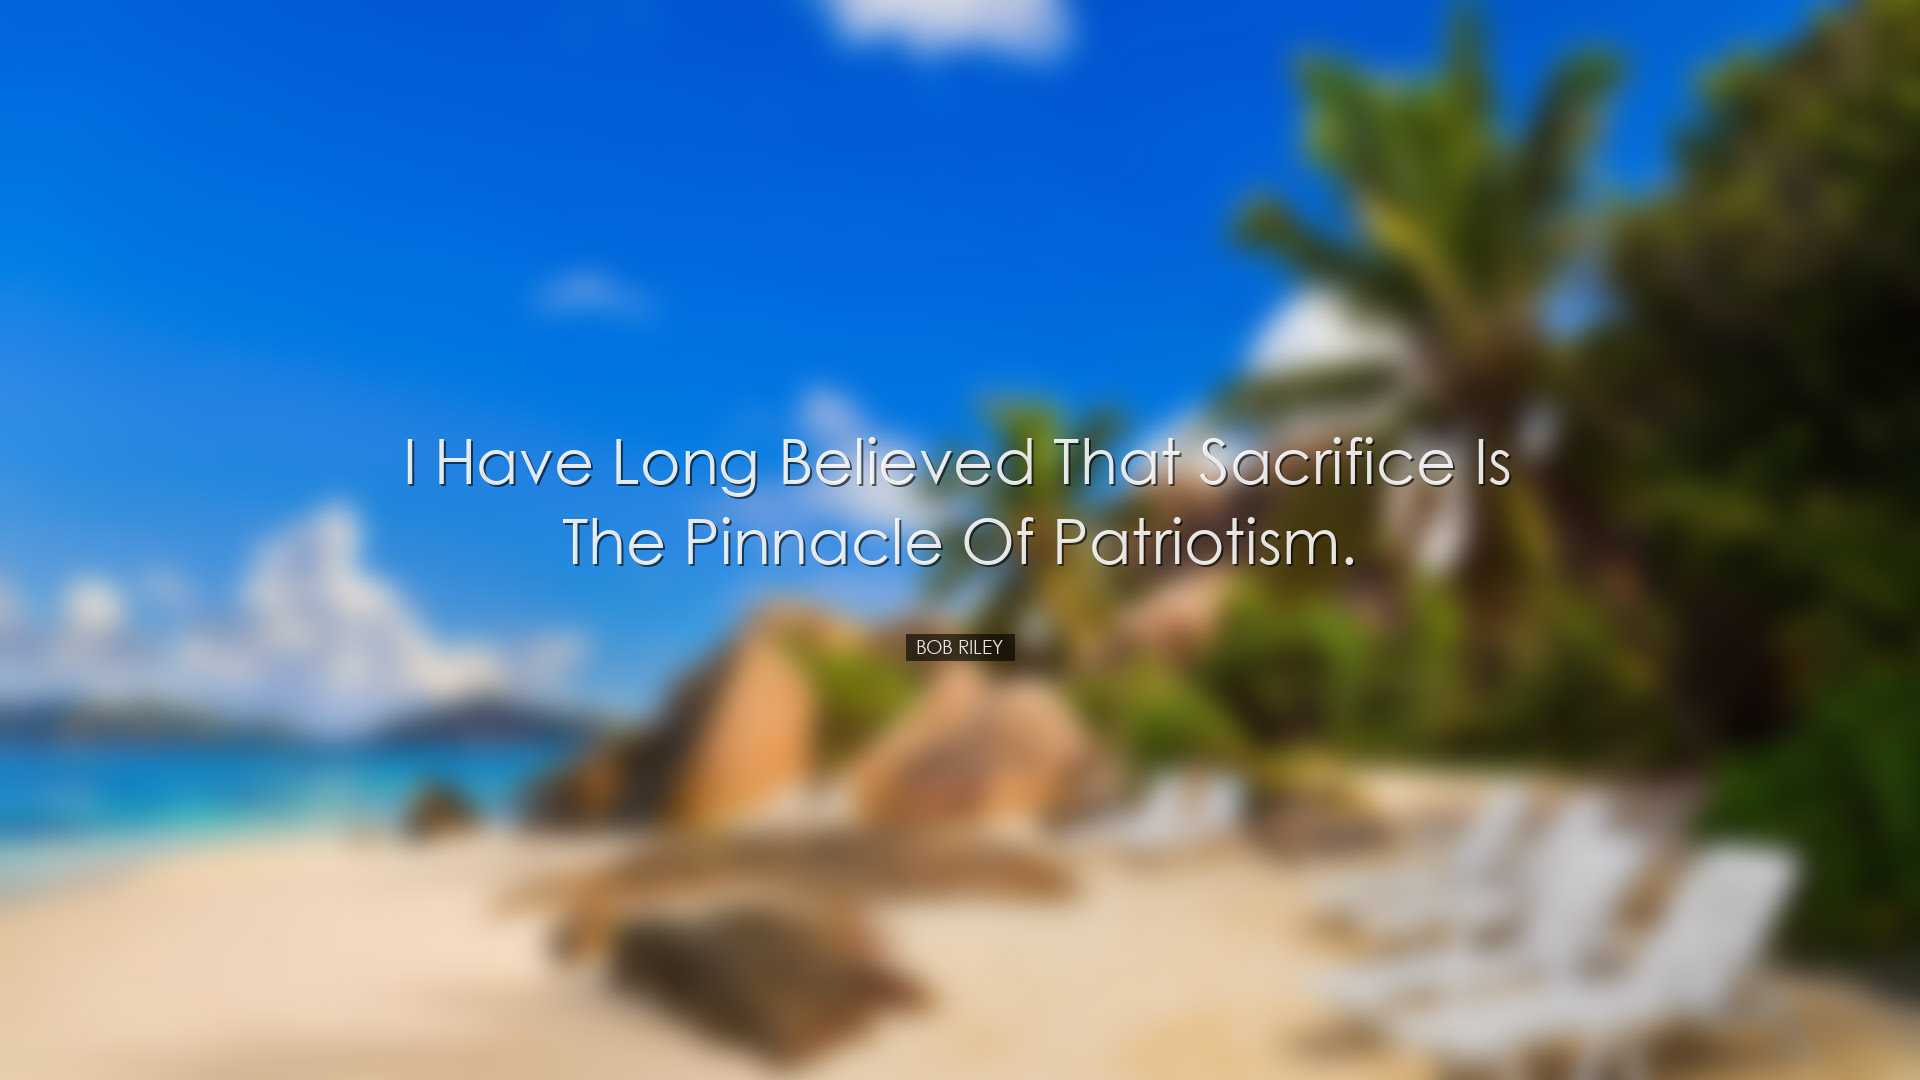 I have long believed that sacrifice is the pinnacle of patriotism.